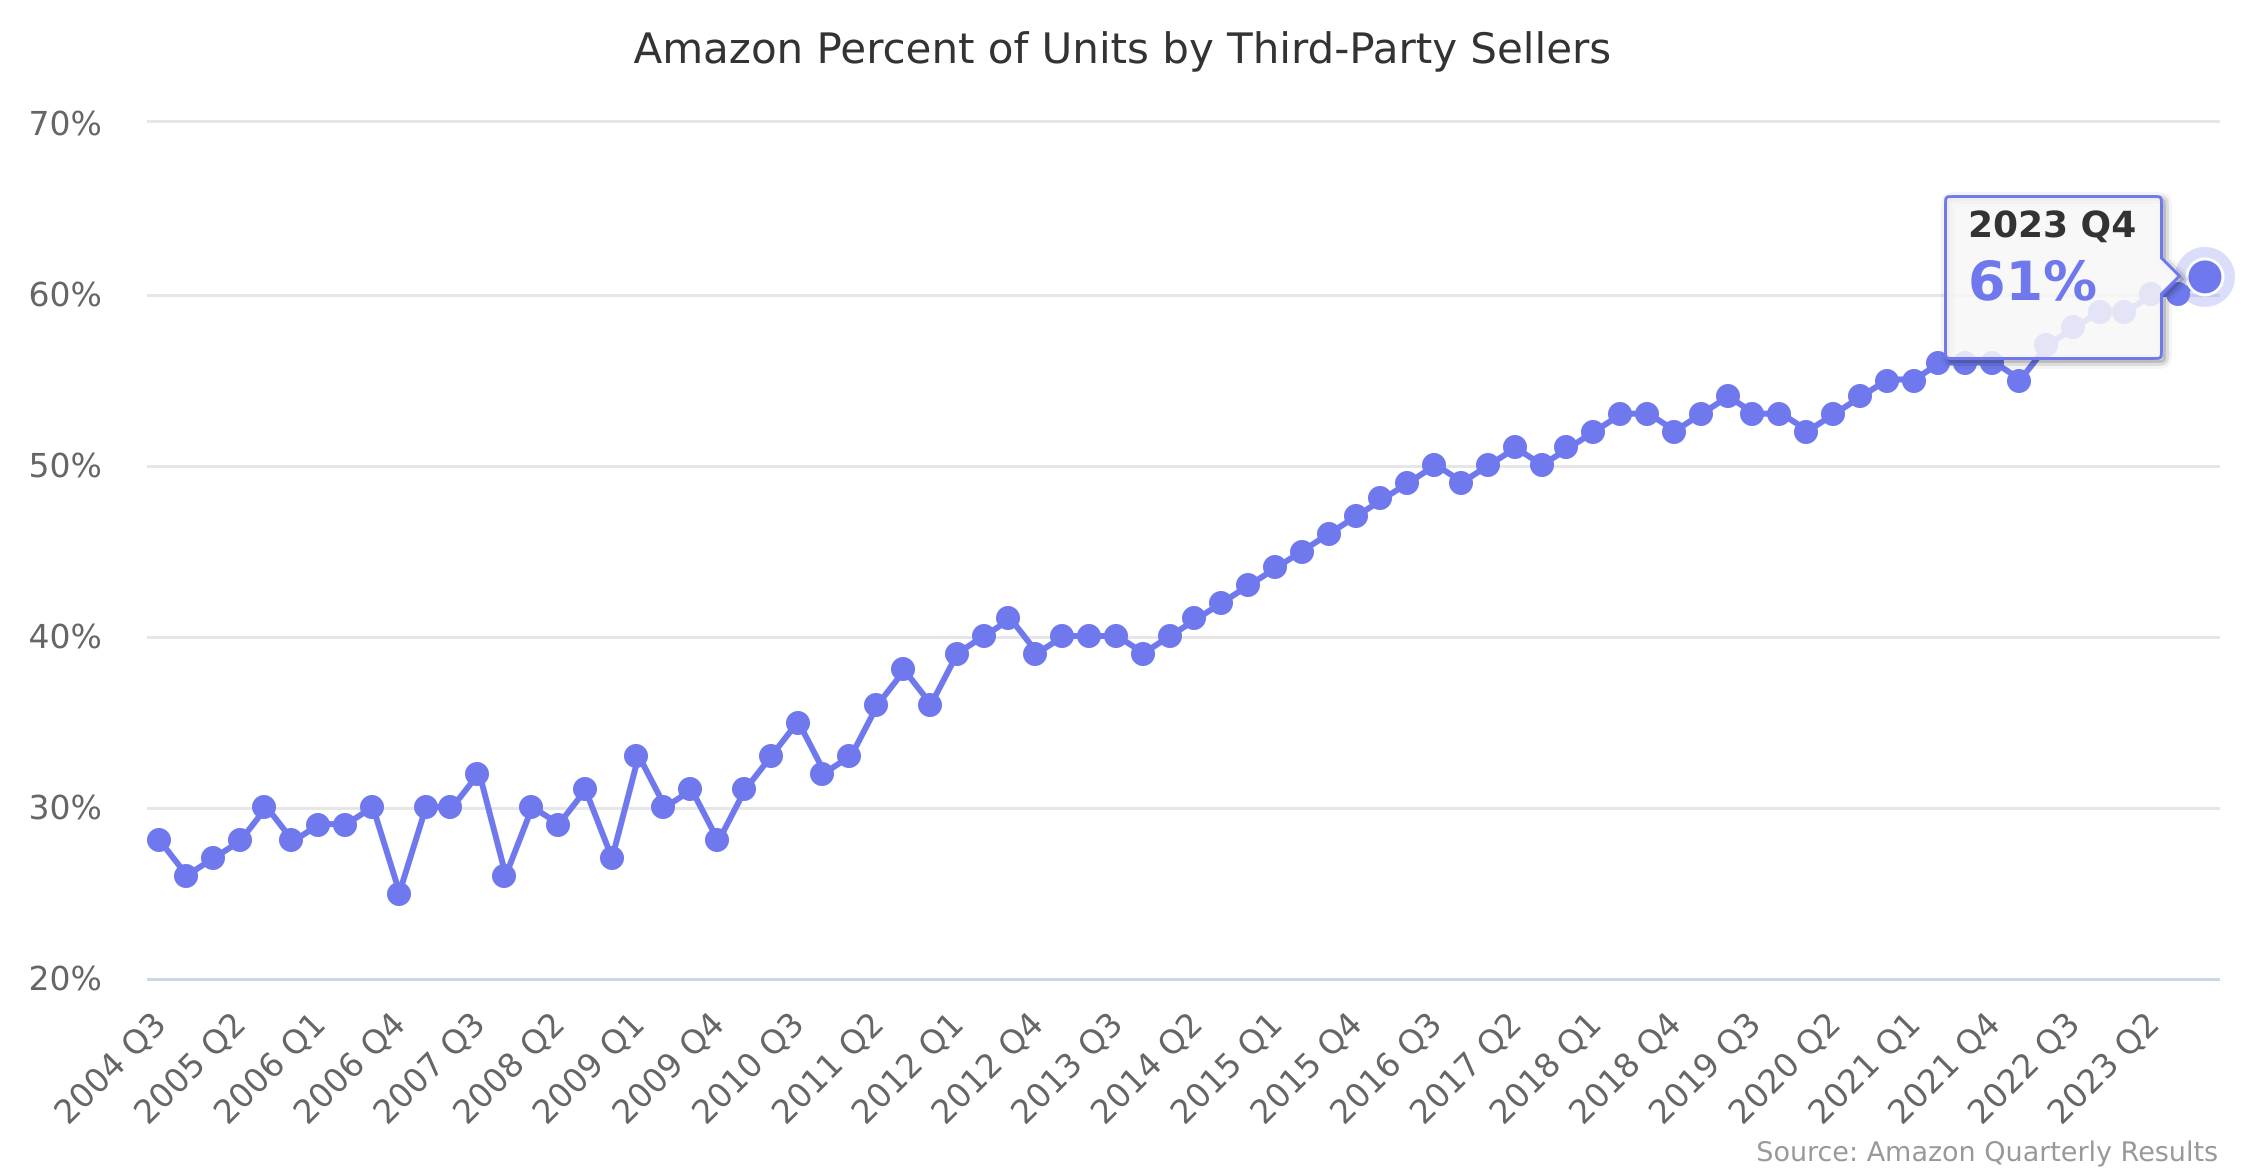 Amazon Percent of Units by Third-Party Sellers 2004-2023